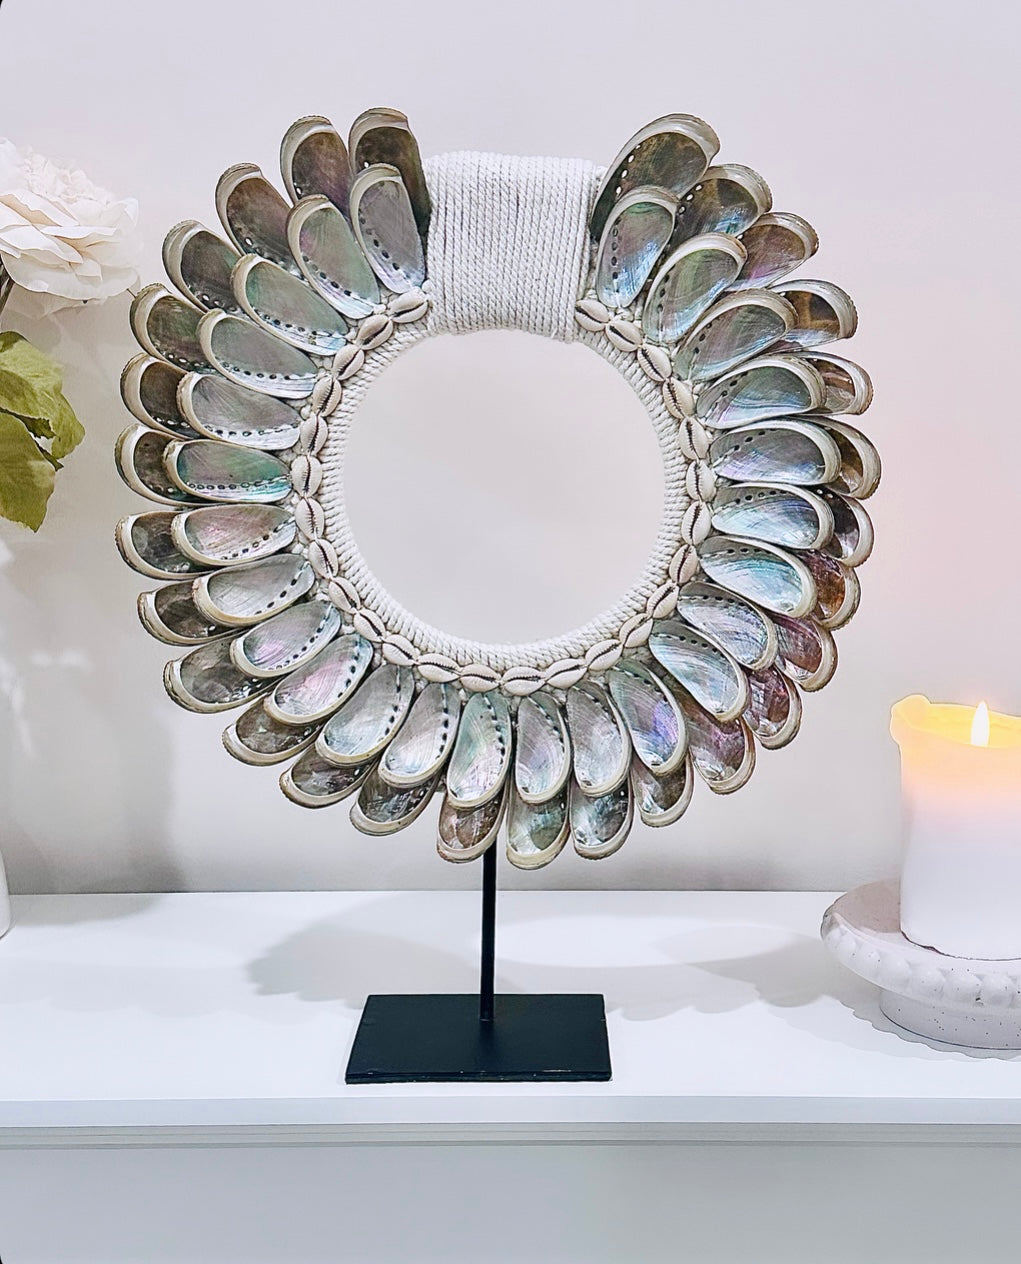 Incredible Large 42cm Mother Of Pearl Necklace On Stand Absolutely Spectacular